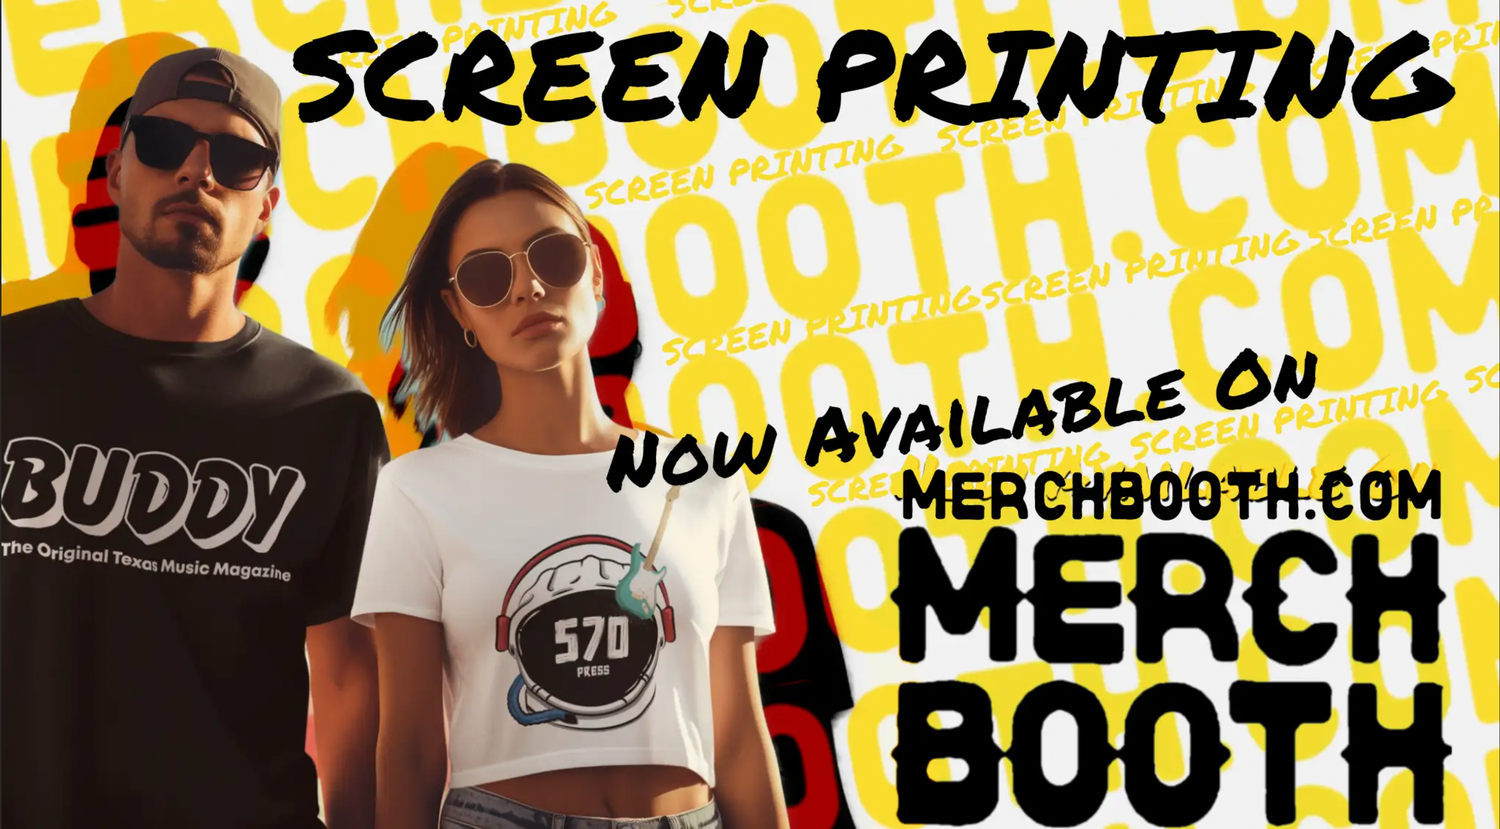 Get Low Cost, Low Quantity Screen Printing